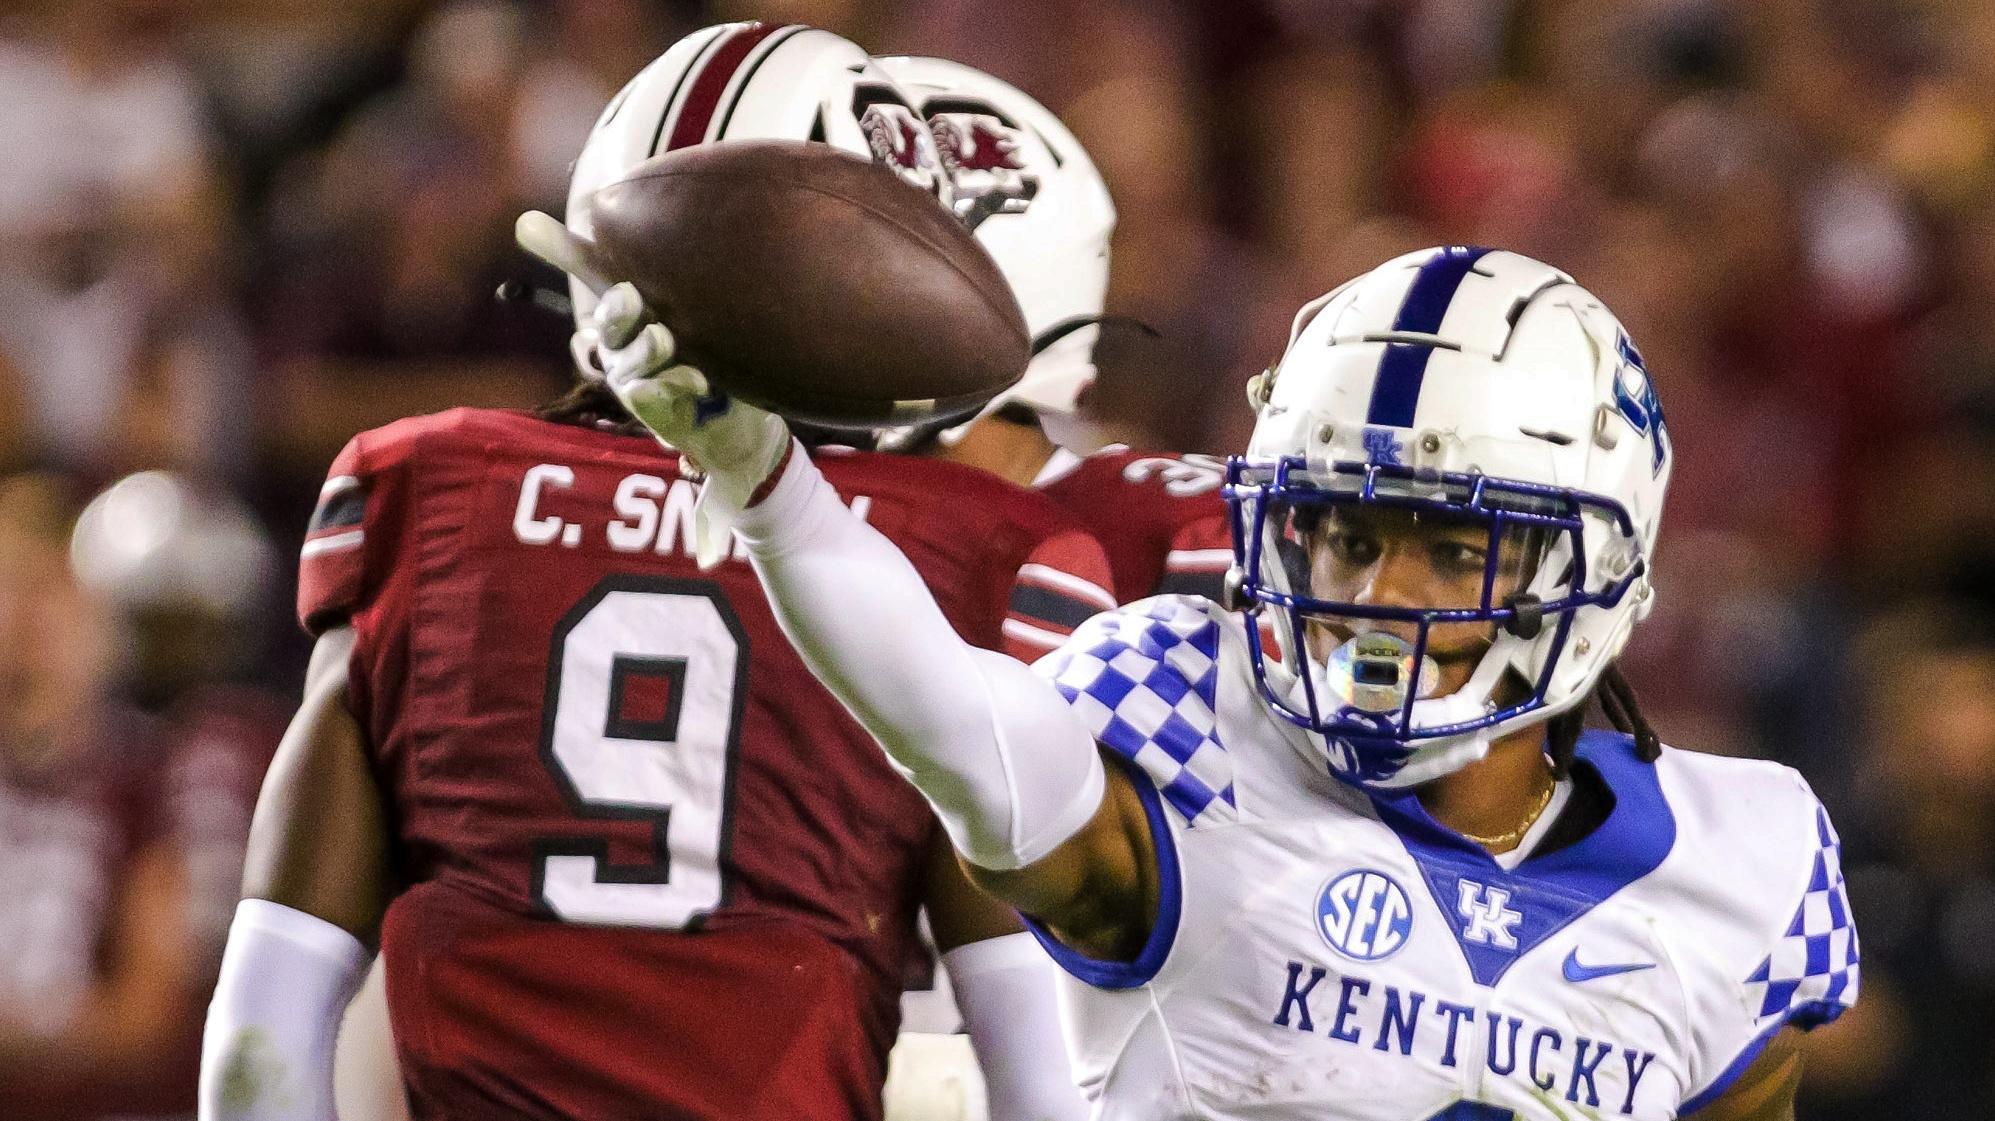 Sep 25, 2021; Columbia, South Carolina, USA; Kentucky Wildcats wide receiver Wan'Dale Robinson (1) celebrates after a first down against the South Carolina Gamecocks in the second half at Williams-Brice Stadium. Mandatory Credit: Jeff Blake-USA TODAY Sports / © Jeff Blake-USA TODAY Sports